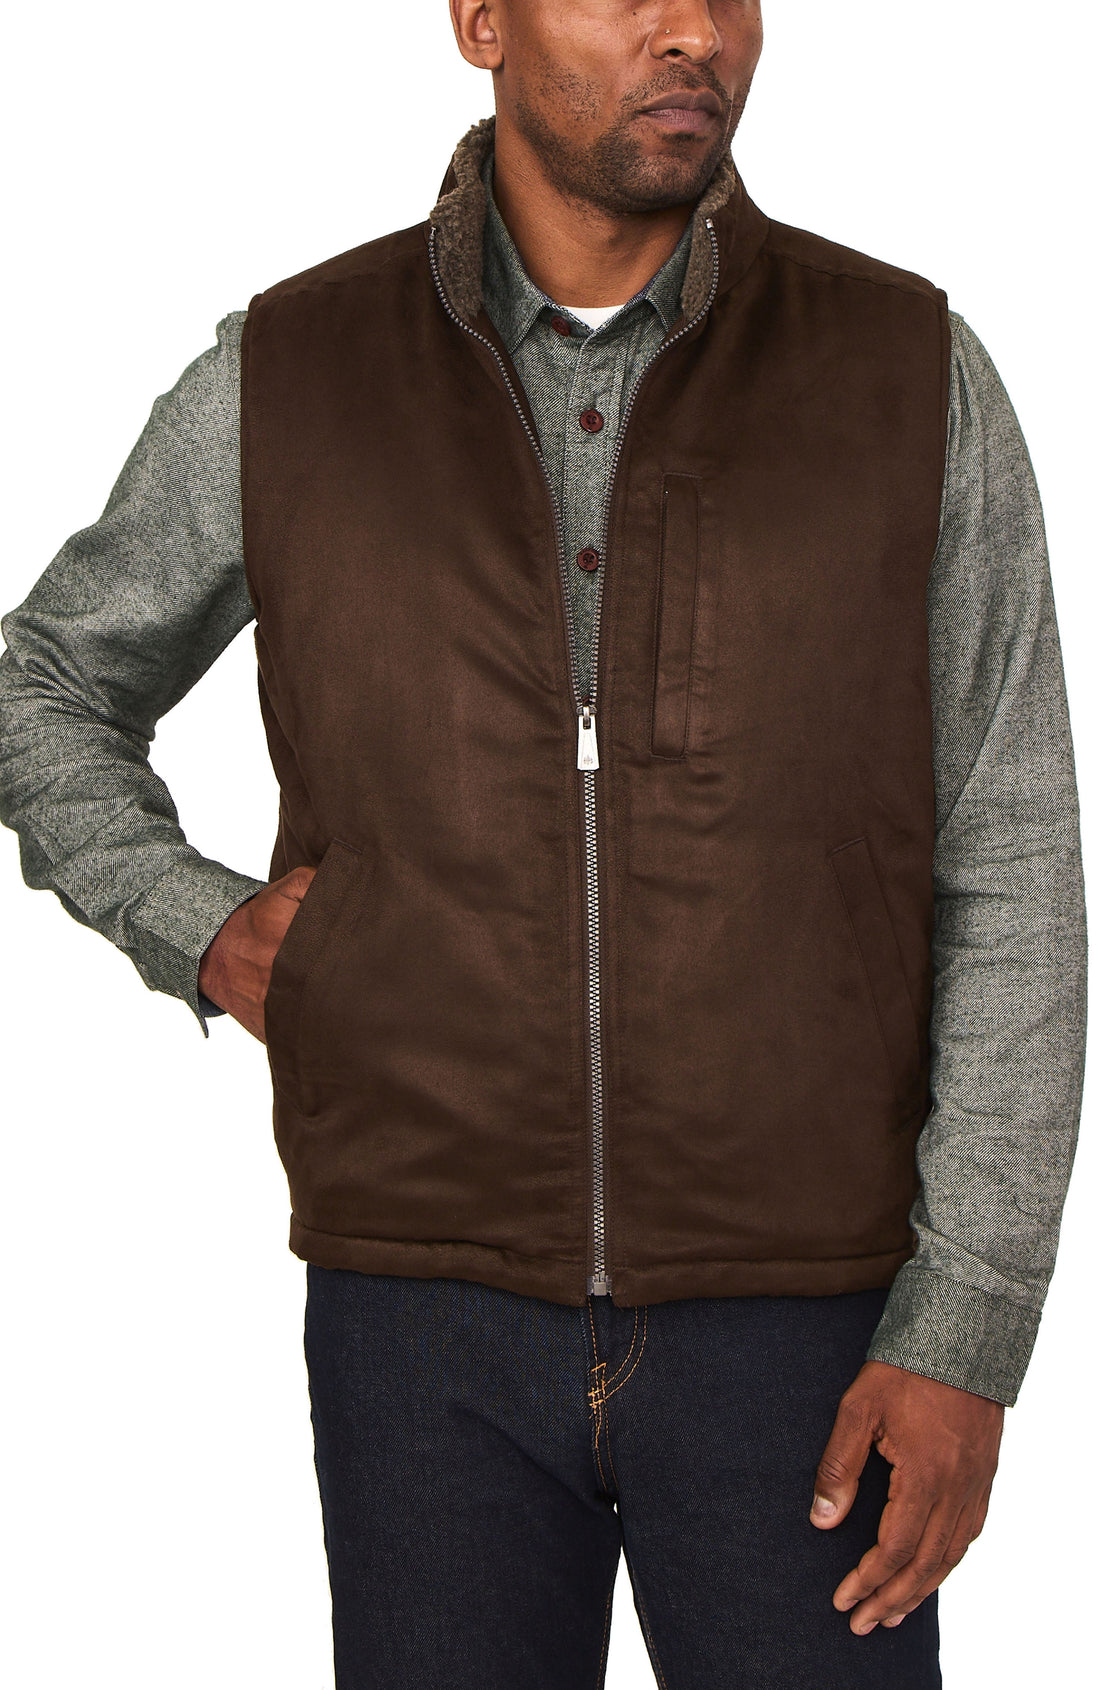 MICRO SUEDE SHERPA LINED VEST